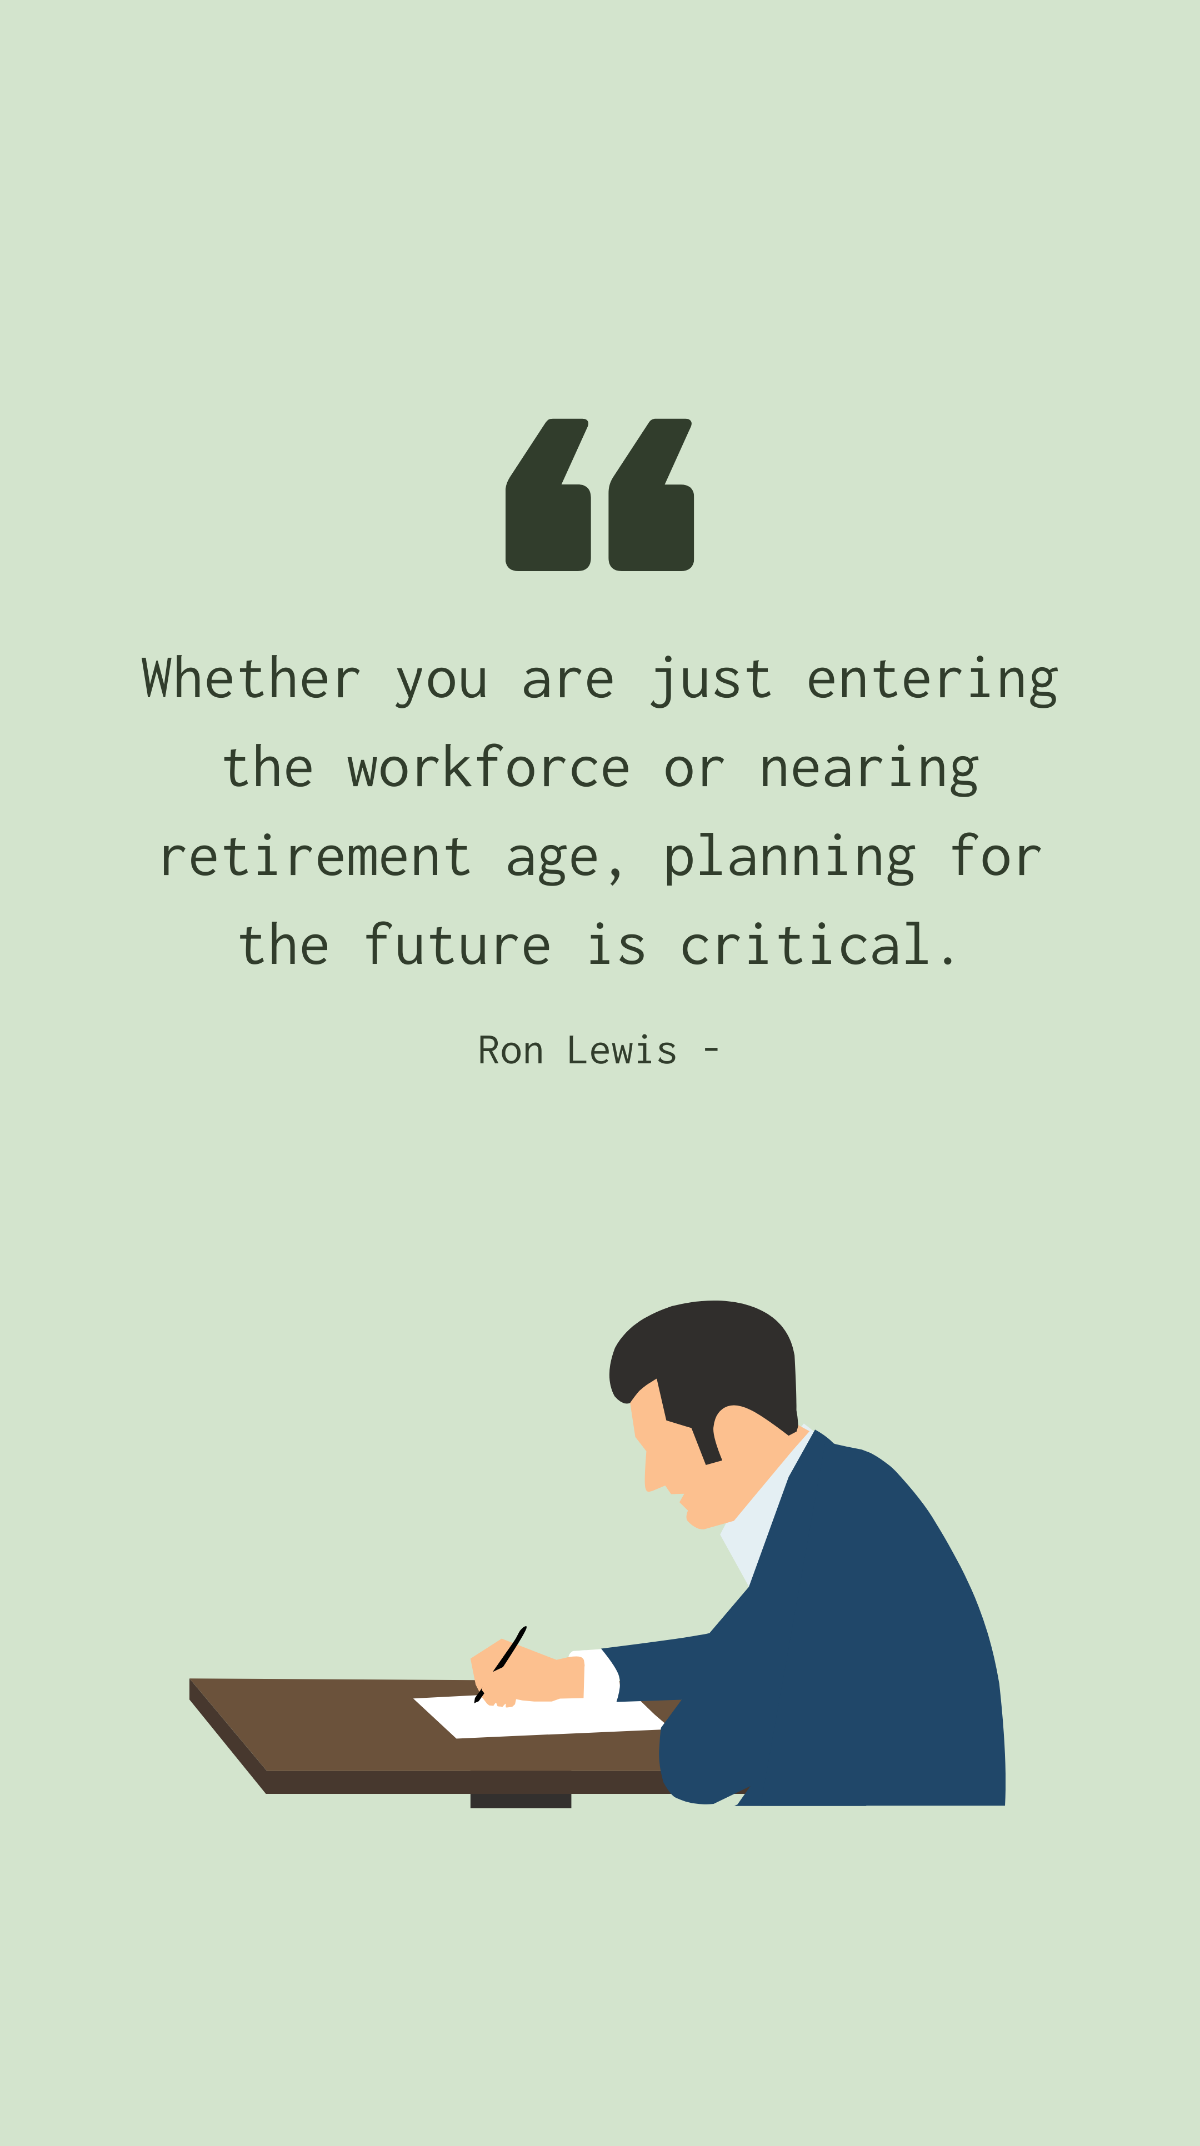 Free Ron Lewis - Whether you are just entering the workforce or nearing retirement age, planning for the future is critical. Template